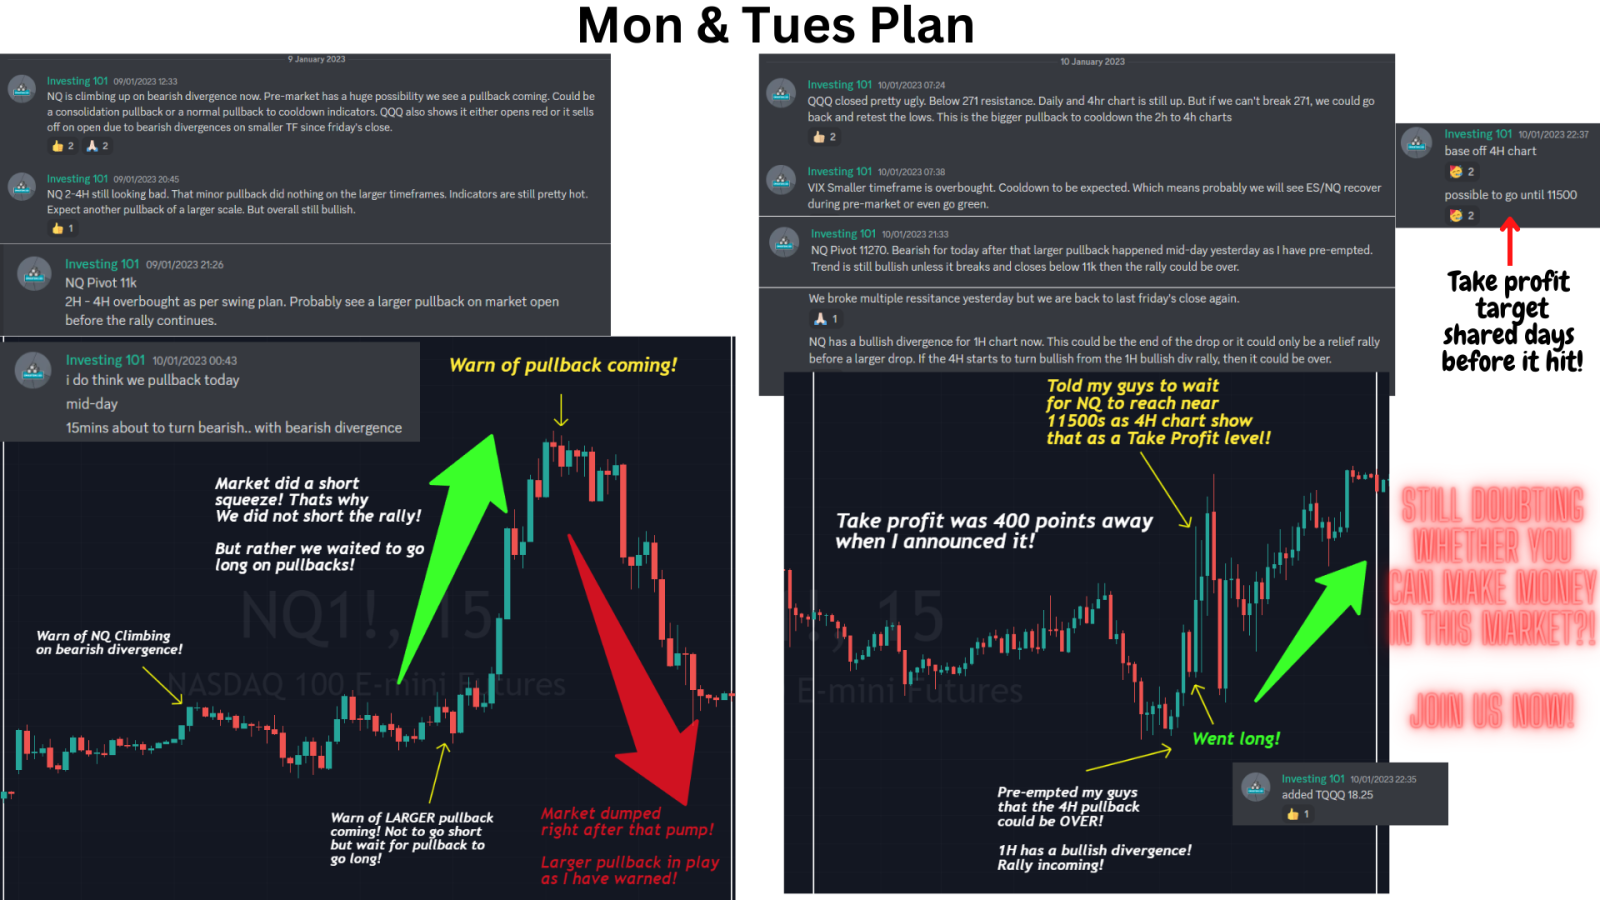 Short week ahead! Strong rally week we had as per previous video! Will the rally continue? If so, how high?! Important data and technicals shared in the video! ...